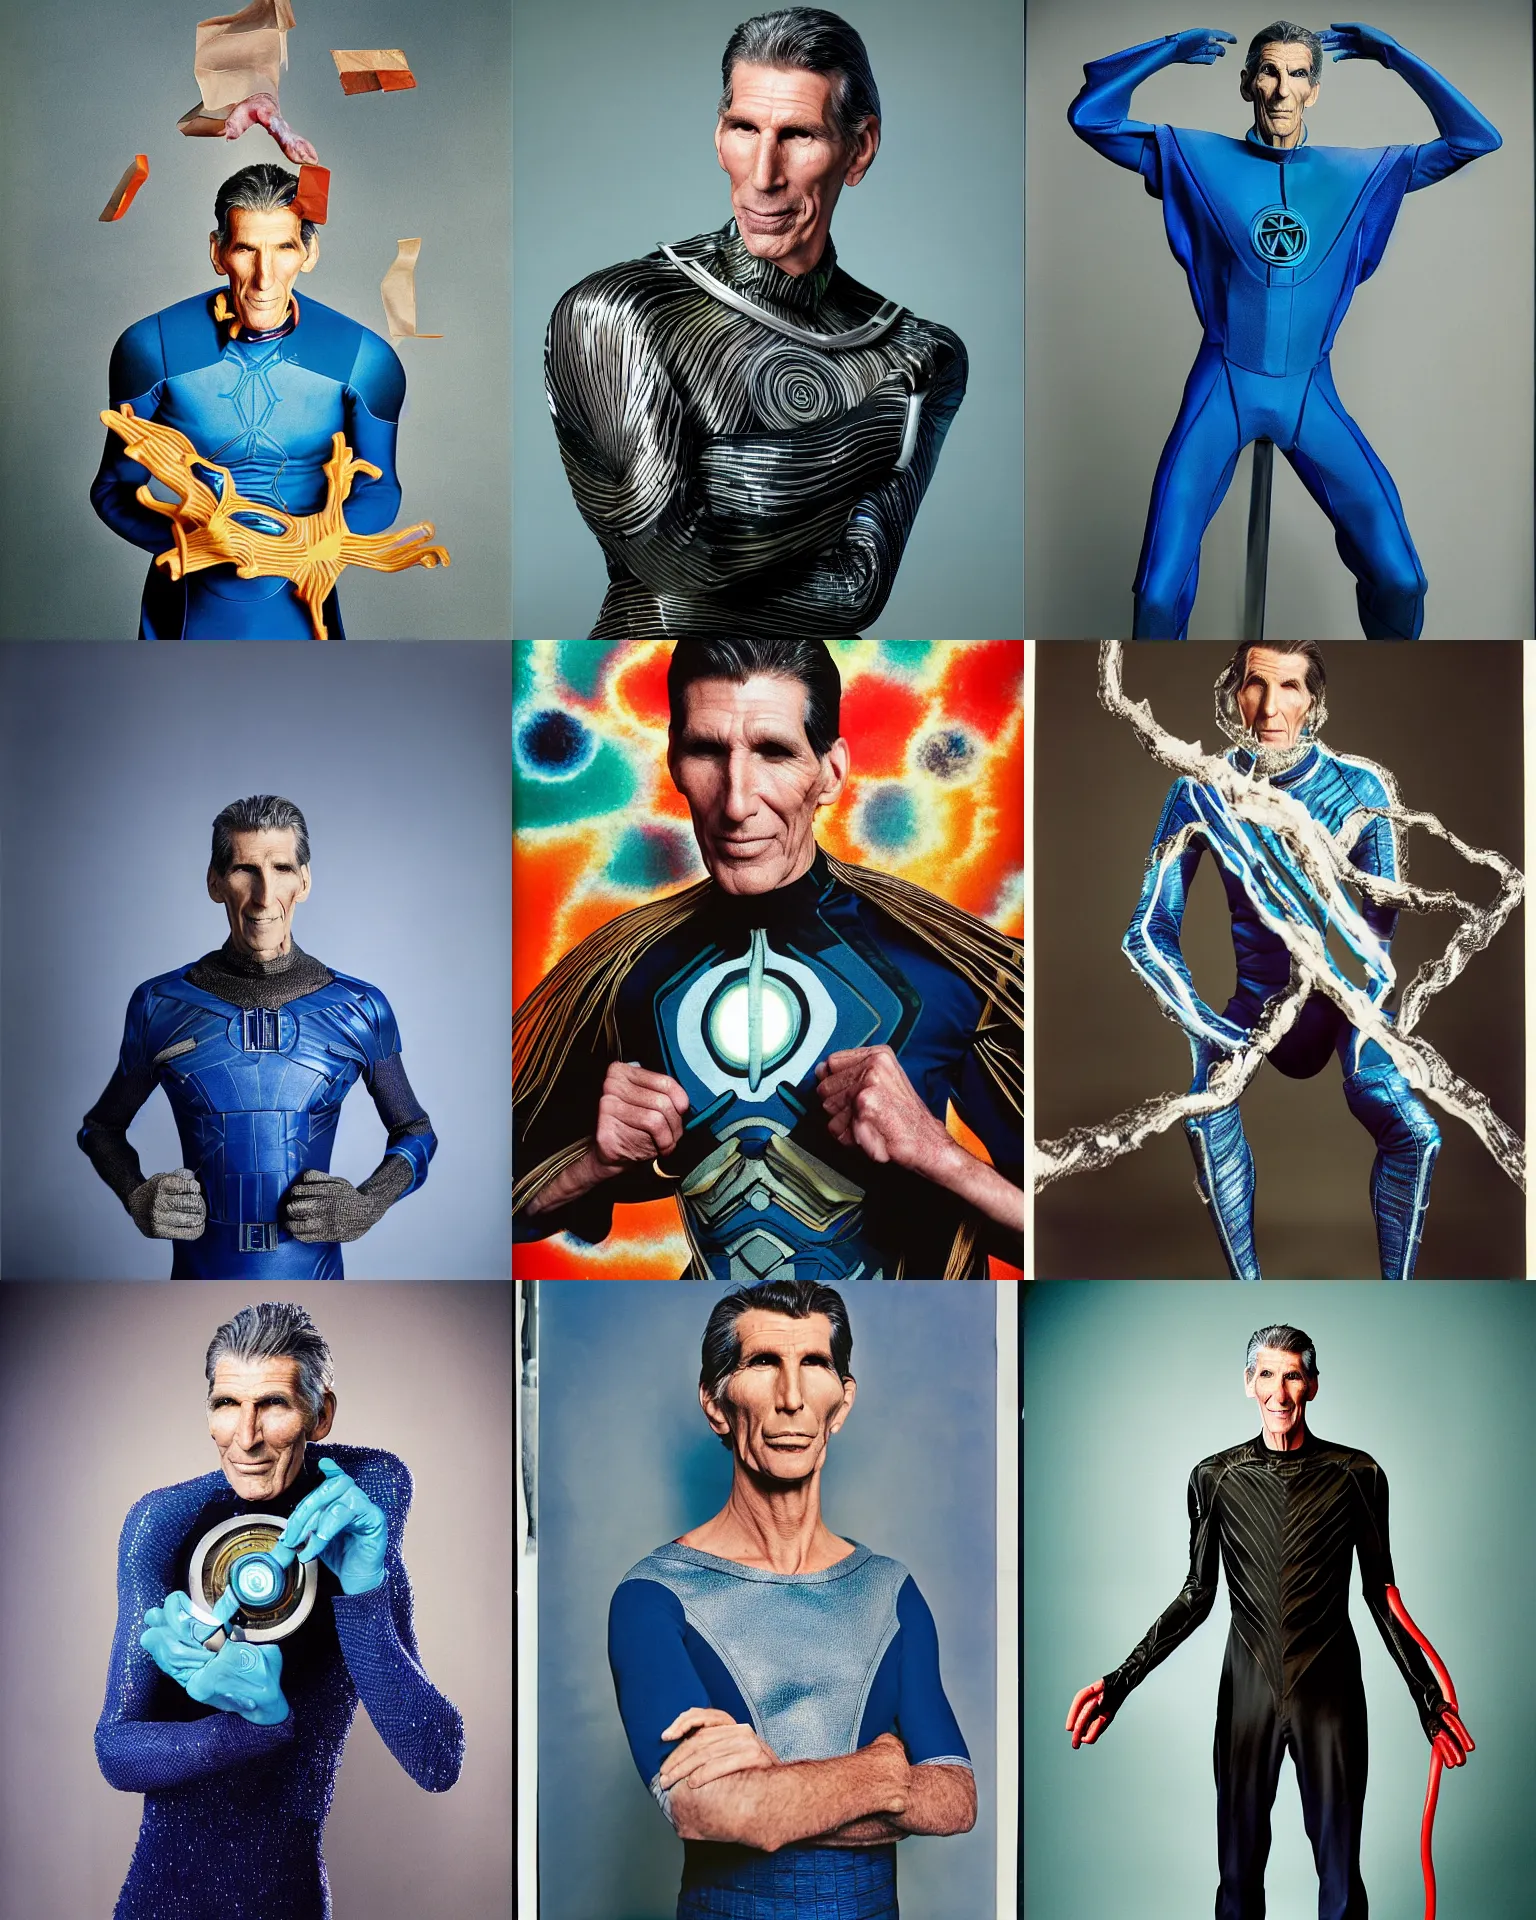 Prompt: Actor Michael Rennie Starring as Reed Richards, Colorful, Modern, Cutting Edge, photographed in costume by Annie Leibovitz, Studio Lighting